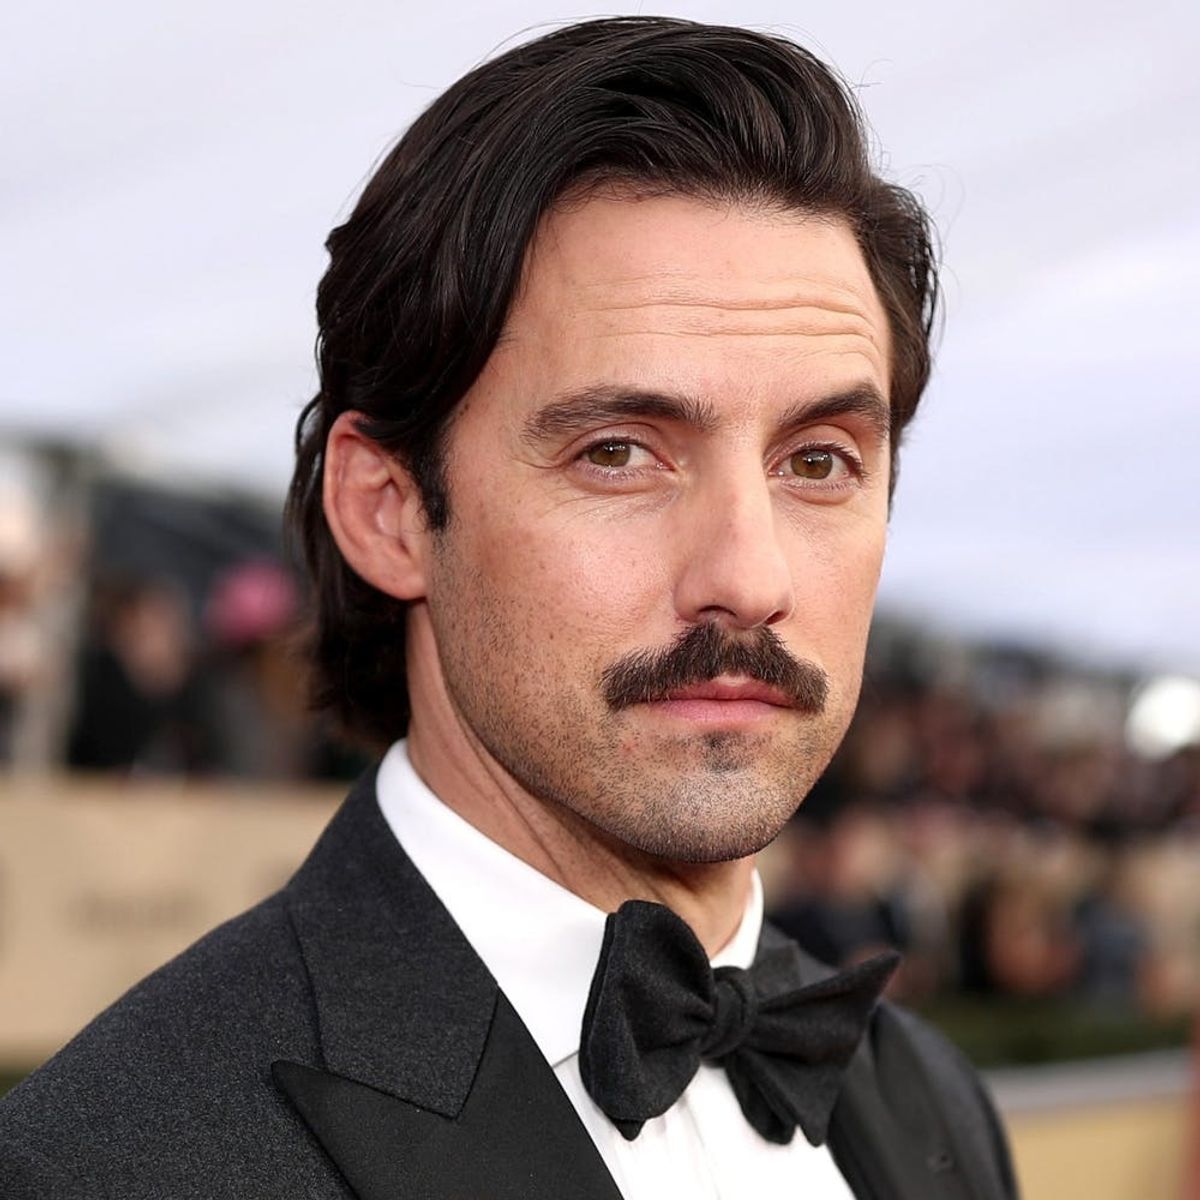 Crock-Pot Just Won the Super Bowl Ad Game With a Spot Featuring ‘This Is Us’ Star Milo Ventimiglia